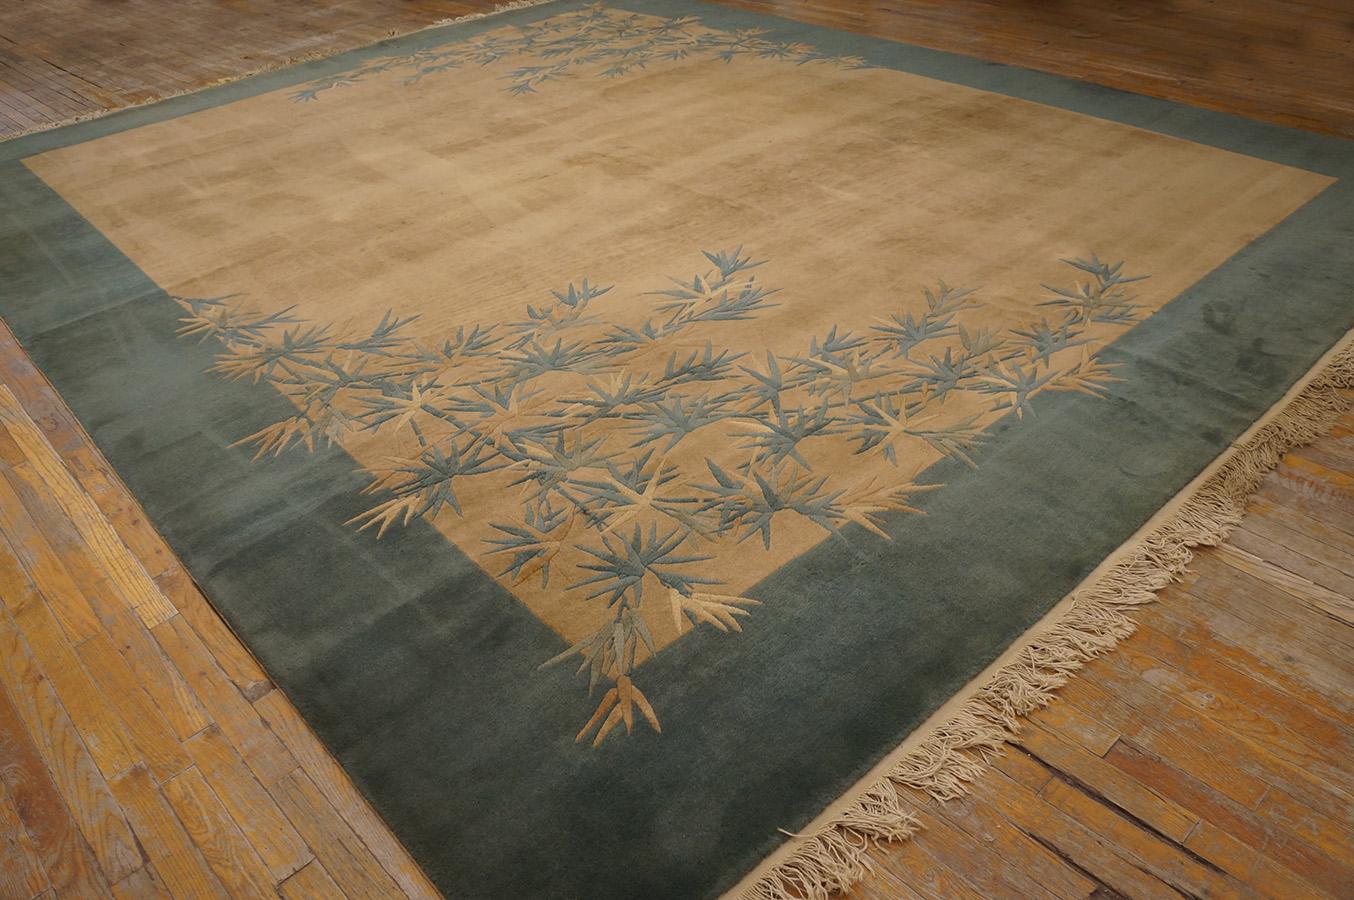 Hand-Knotted 1920s Chinese Art Deco Carpet ( 11' 10'' x 14' 8'' - 360 x 447 cm ) For Sale